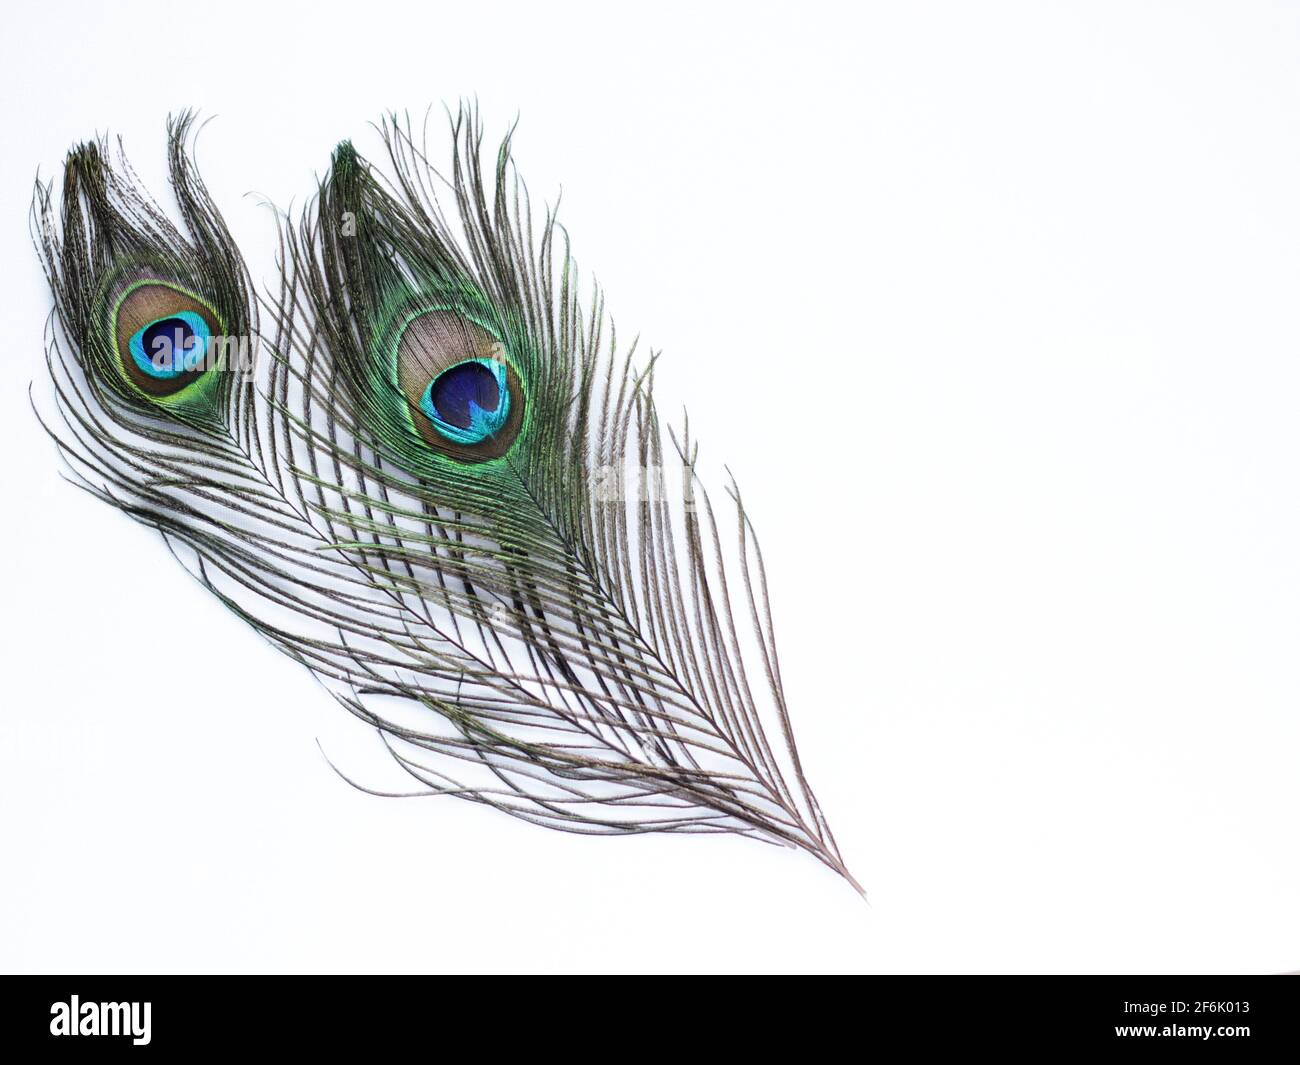 Clothing and home decoration. Peacock feathers on white background ...